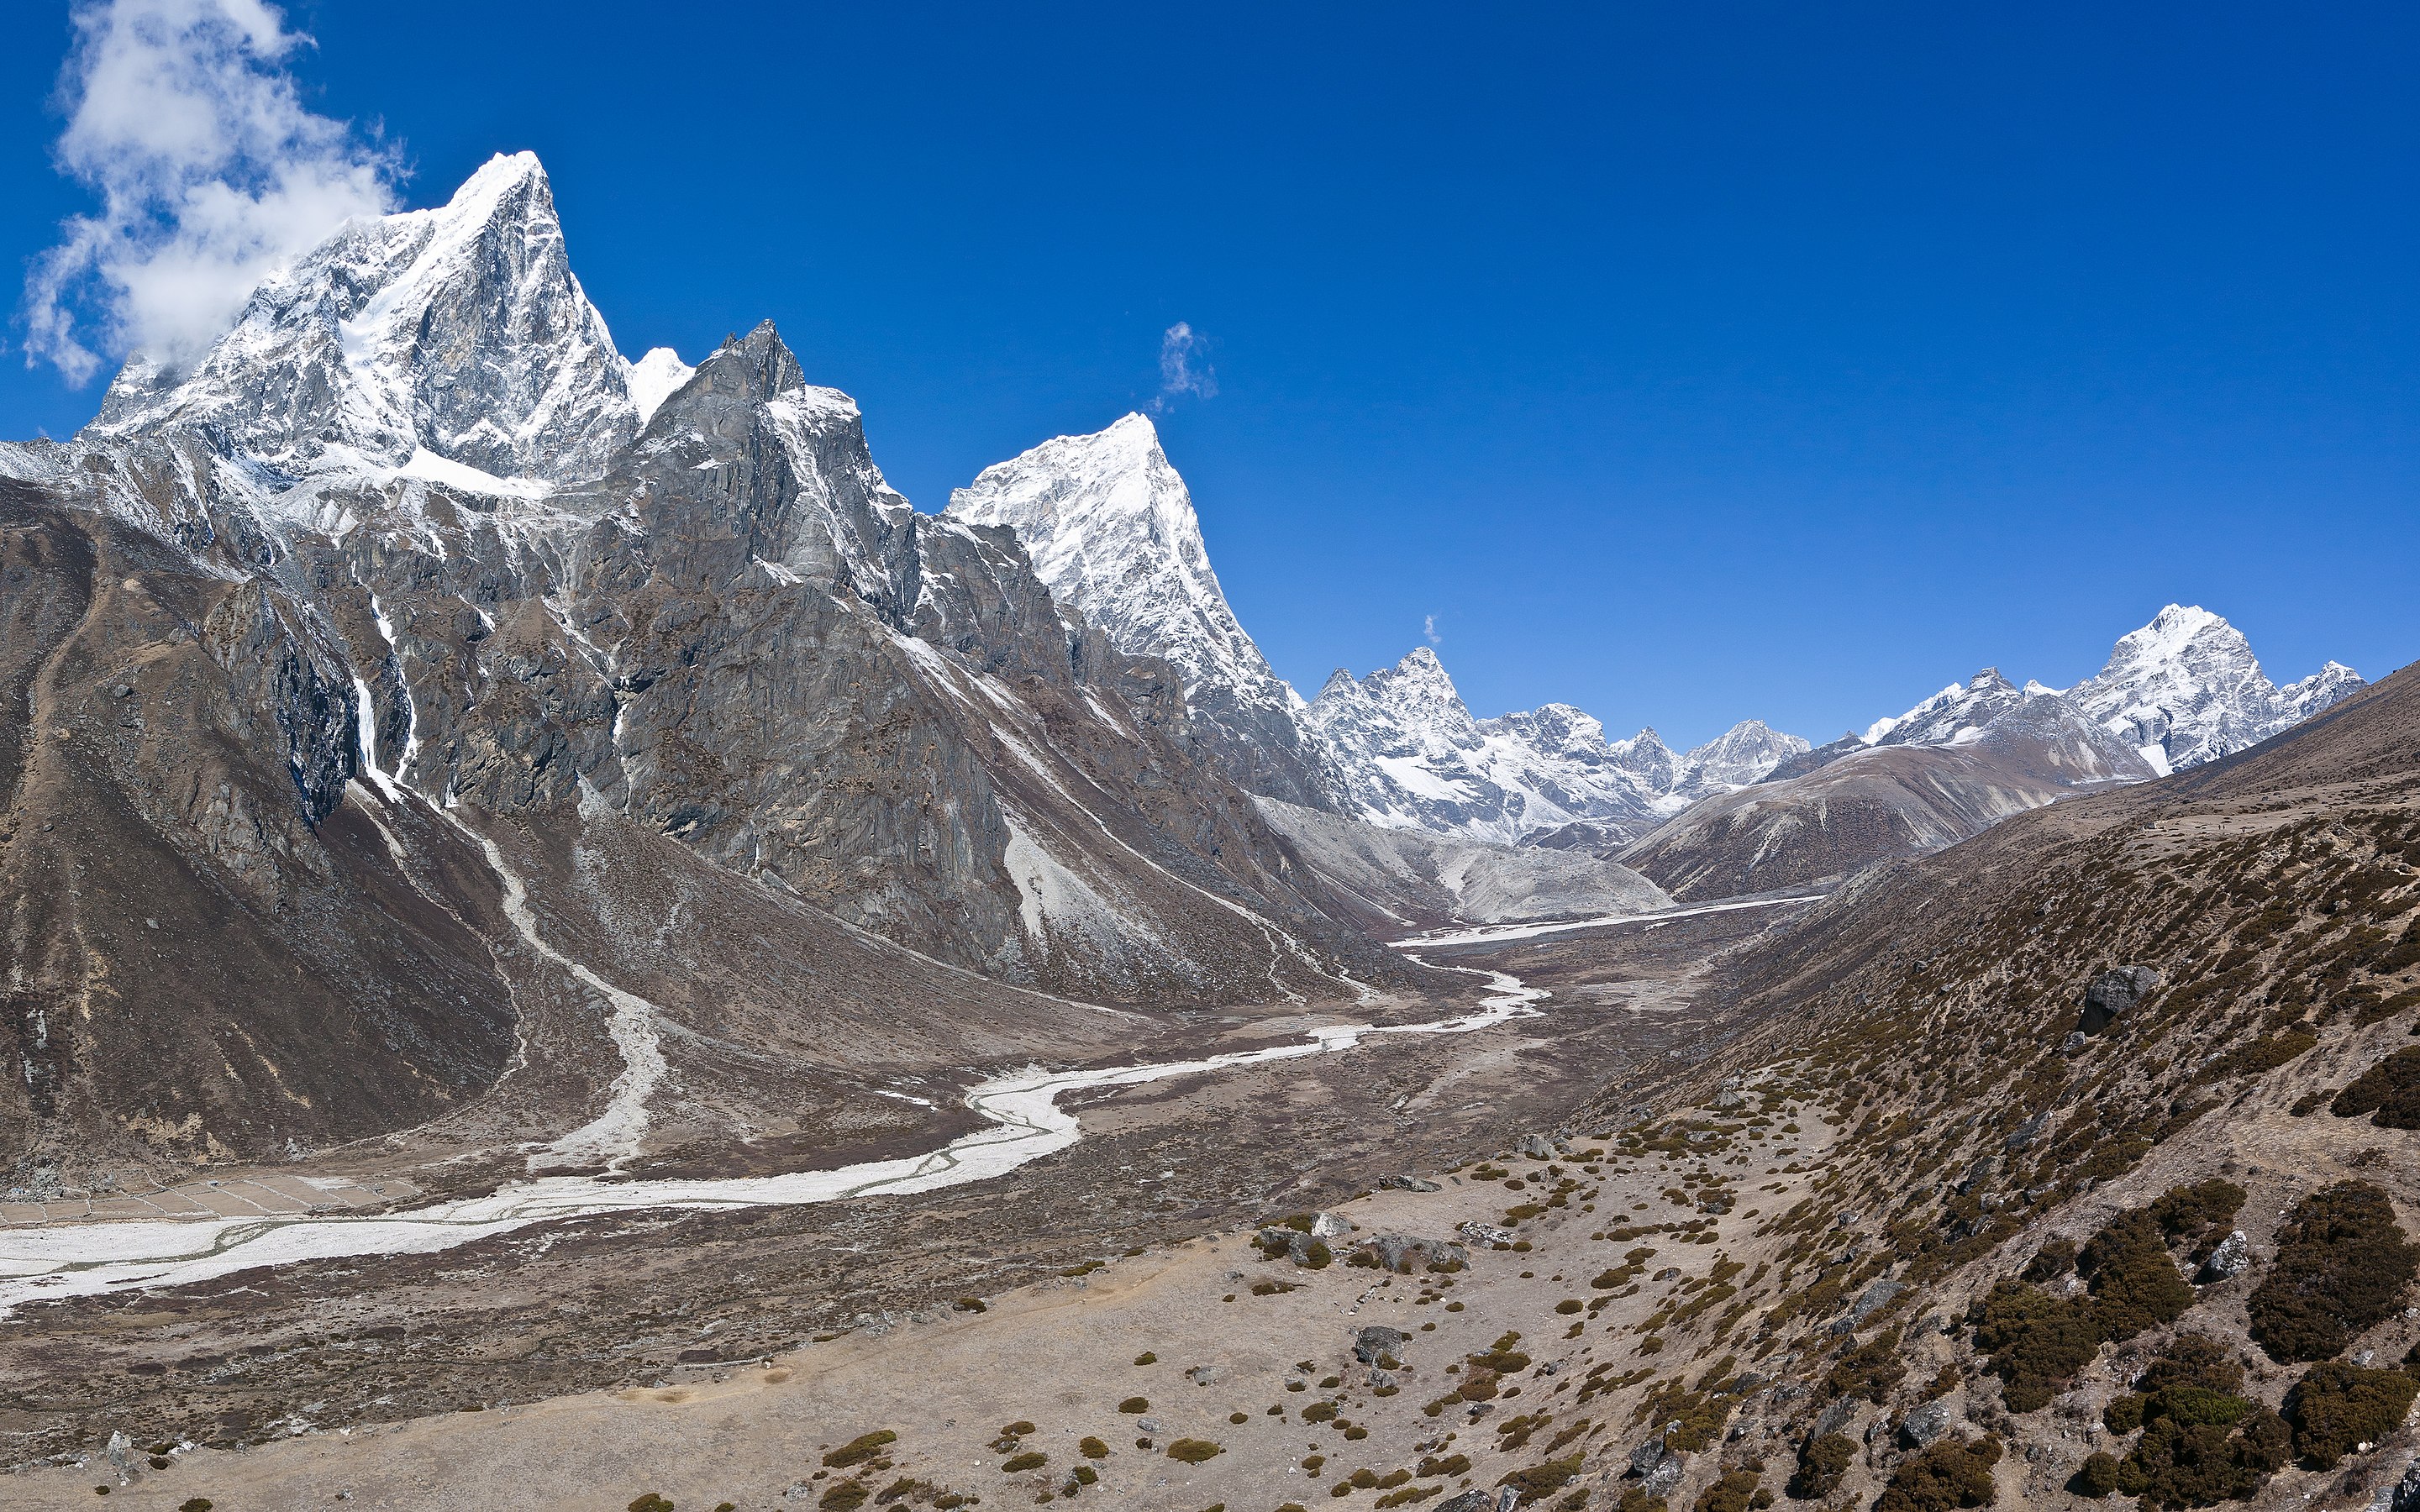 Panorama view of the Khumbu Khola valley above Pheriche. To the left are the peaks of Tawoche (6542m) and Cholatse (6440m). © Frank Jones